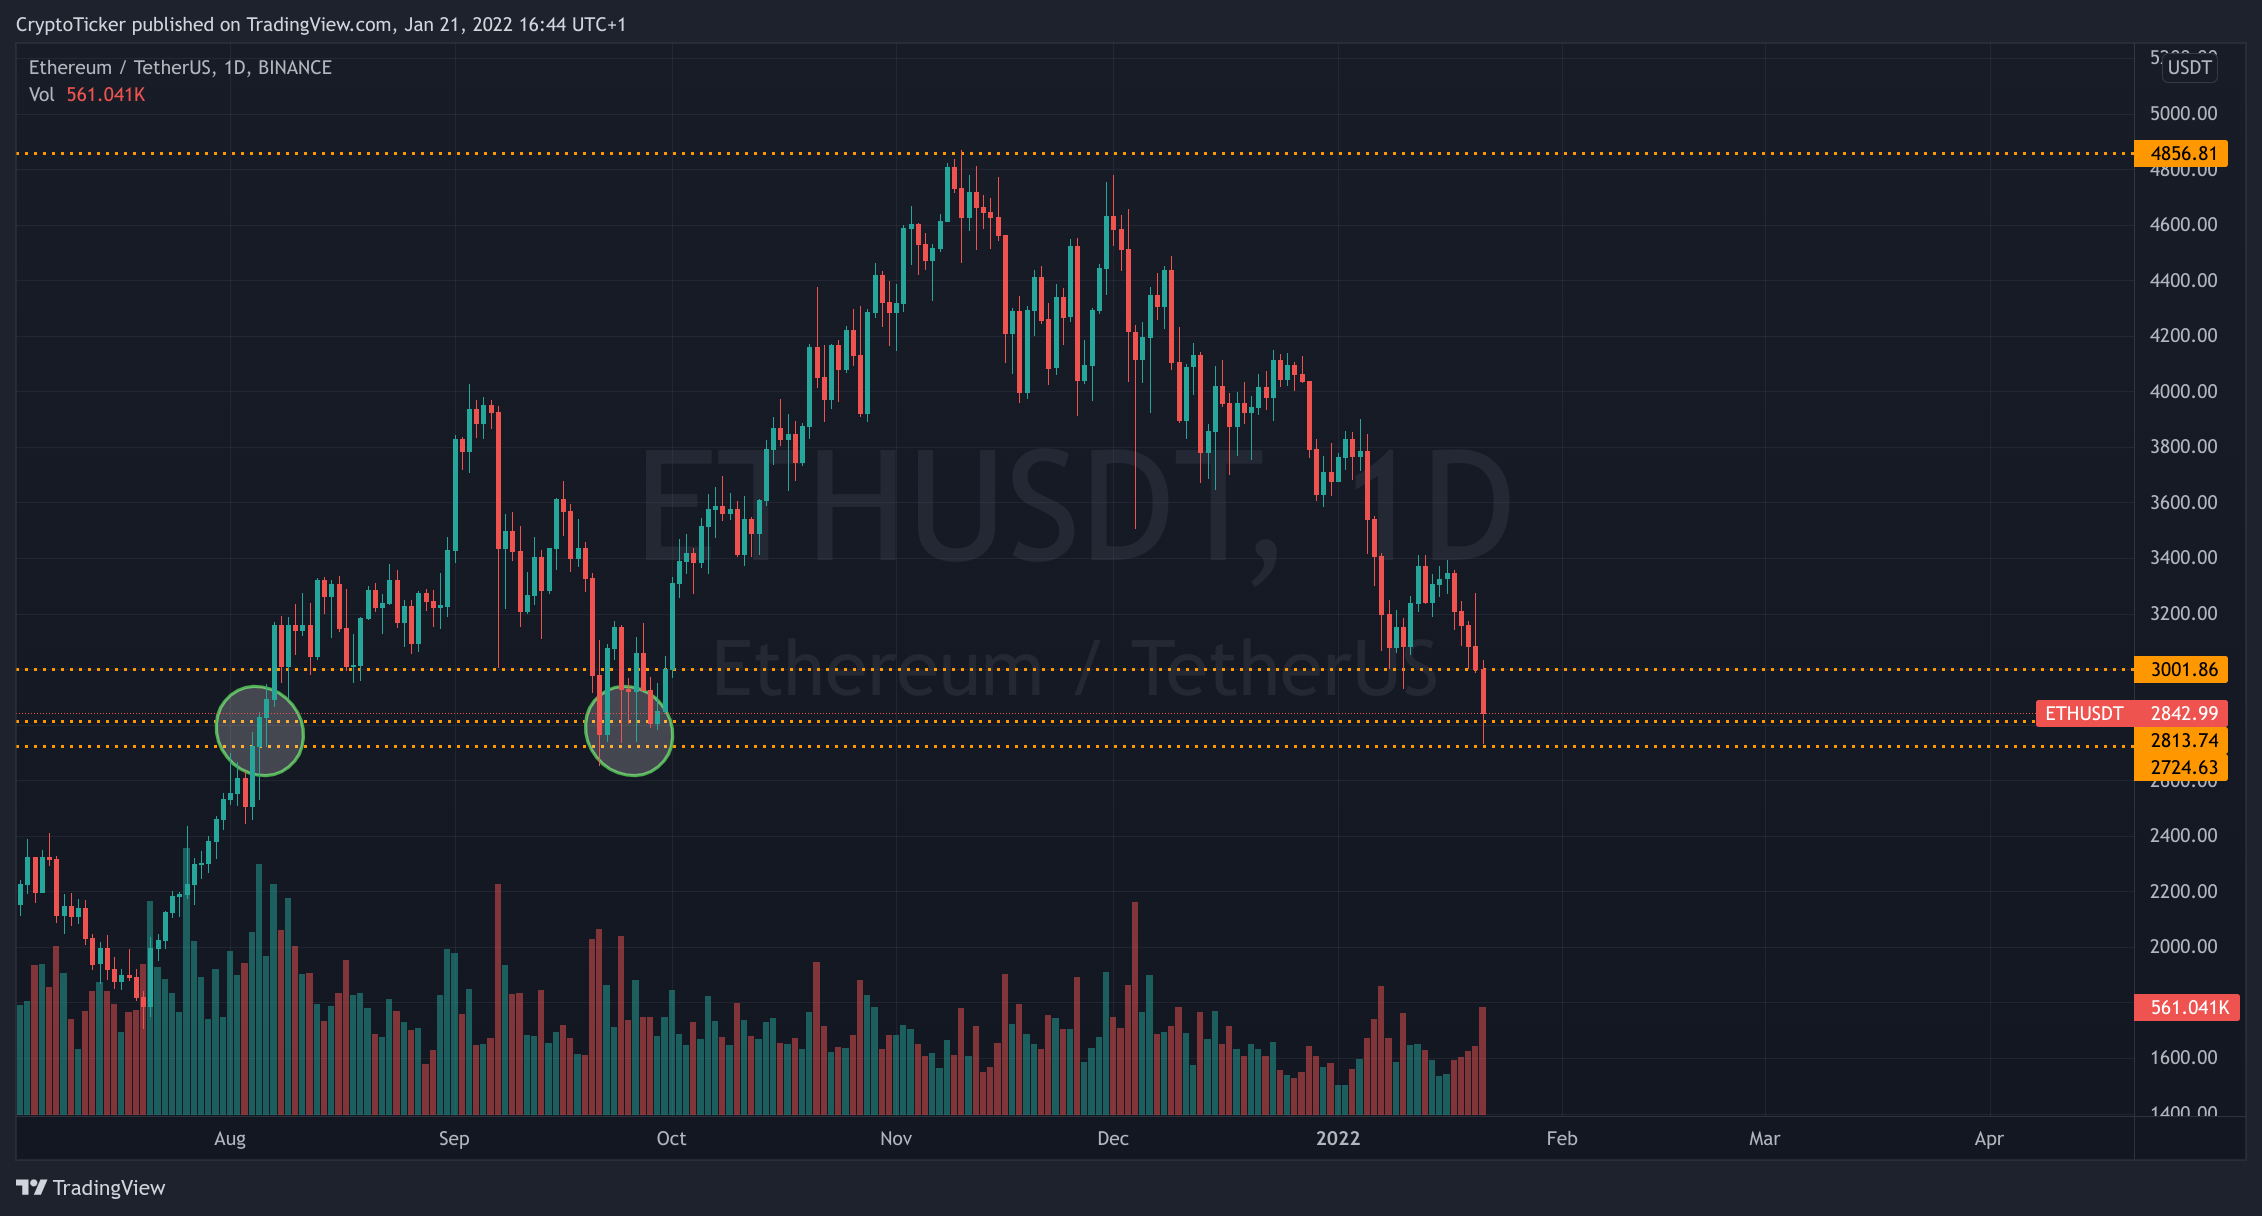 ETH/USD 1-day chart showing the important support level